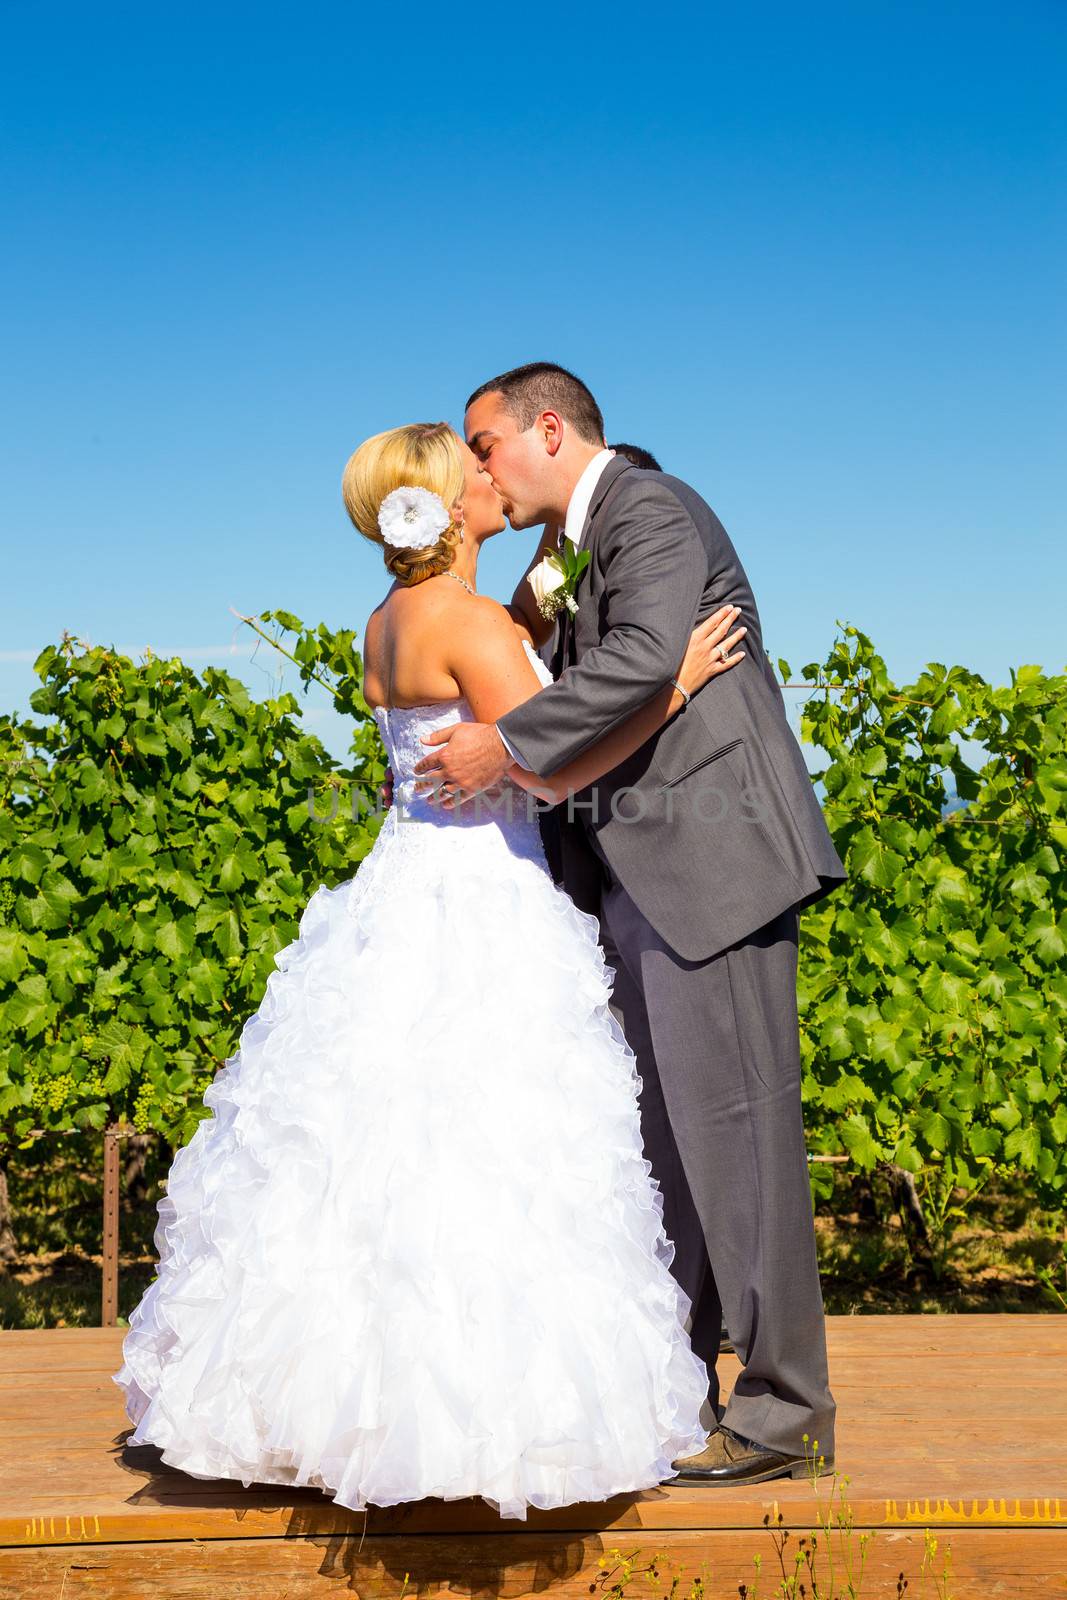 A bride and groom seal the deal with a kiss during their wedding day ceremony at a vineyard winery in Oregon.